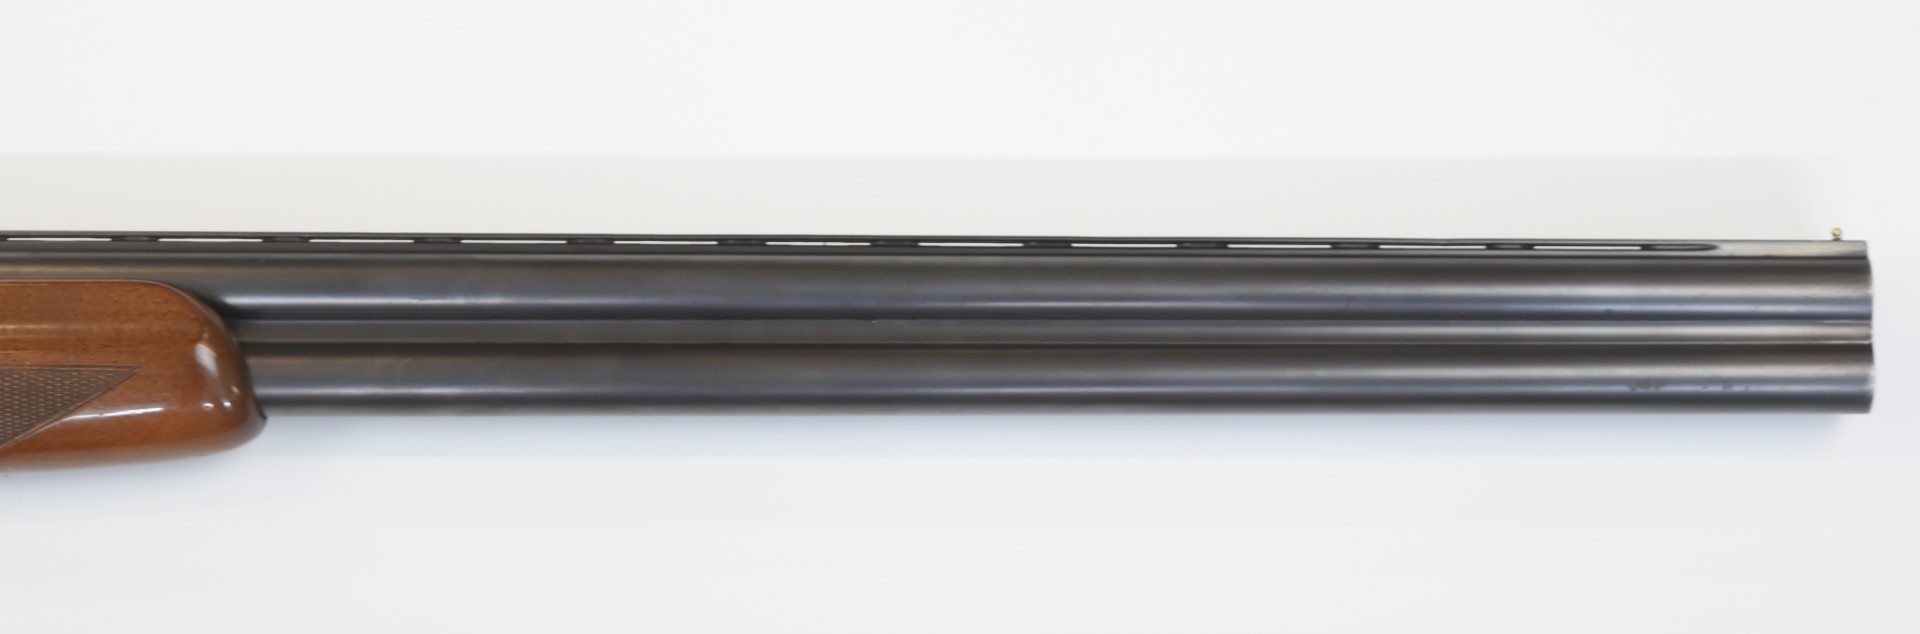 Beretta S685E 12 bore over and under ejector shotgun with engraved lock, underside, trigger guard, - Image 5 of 11